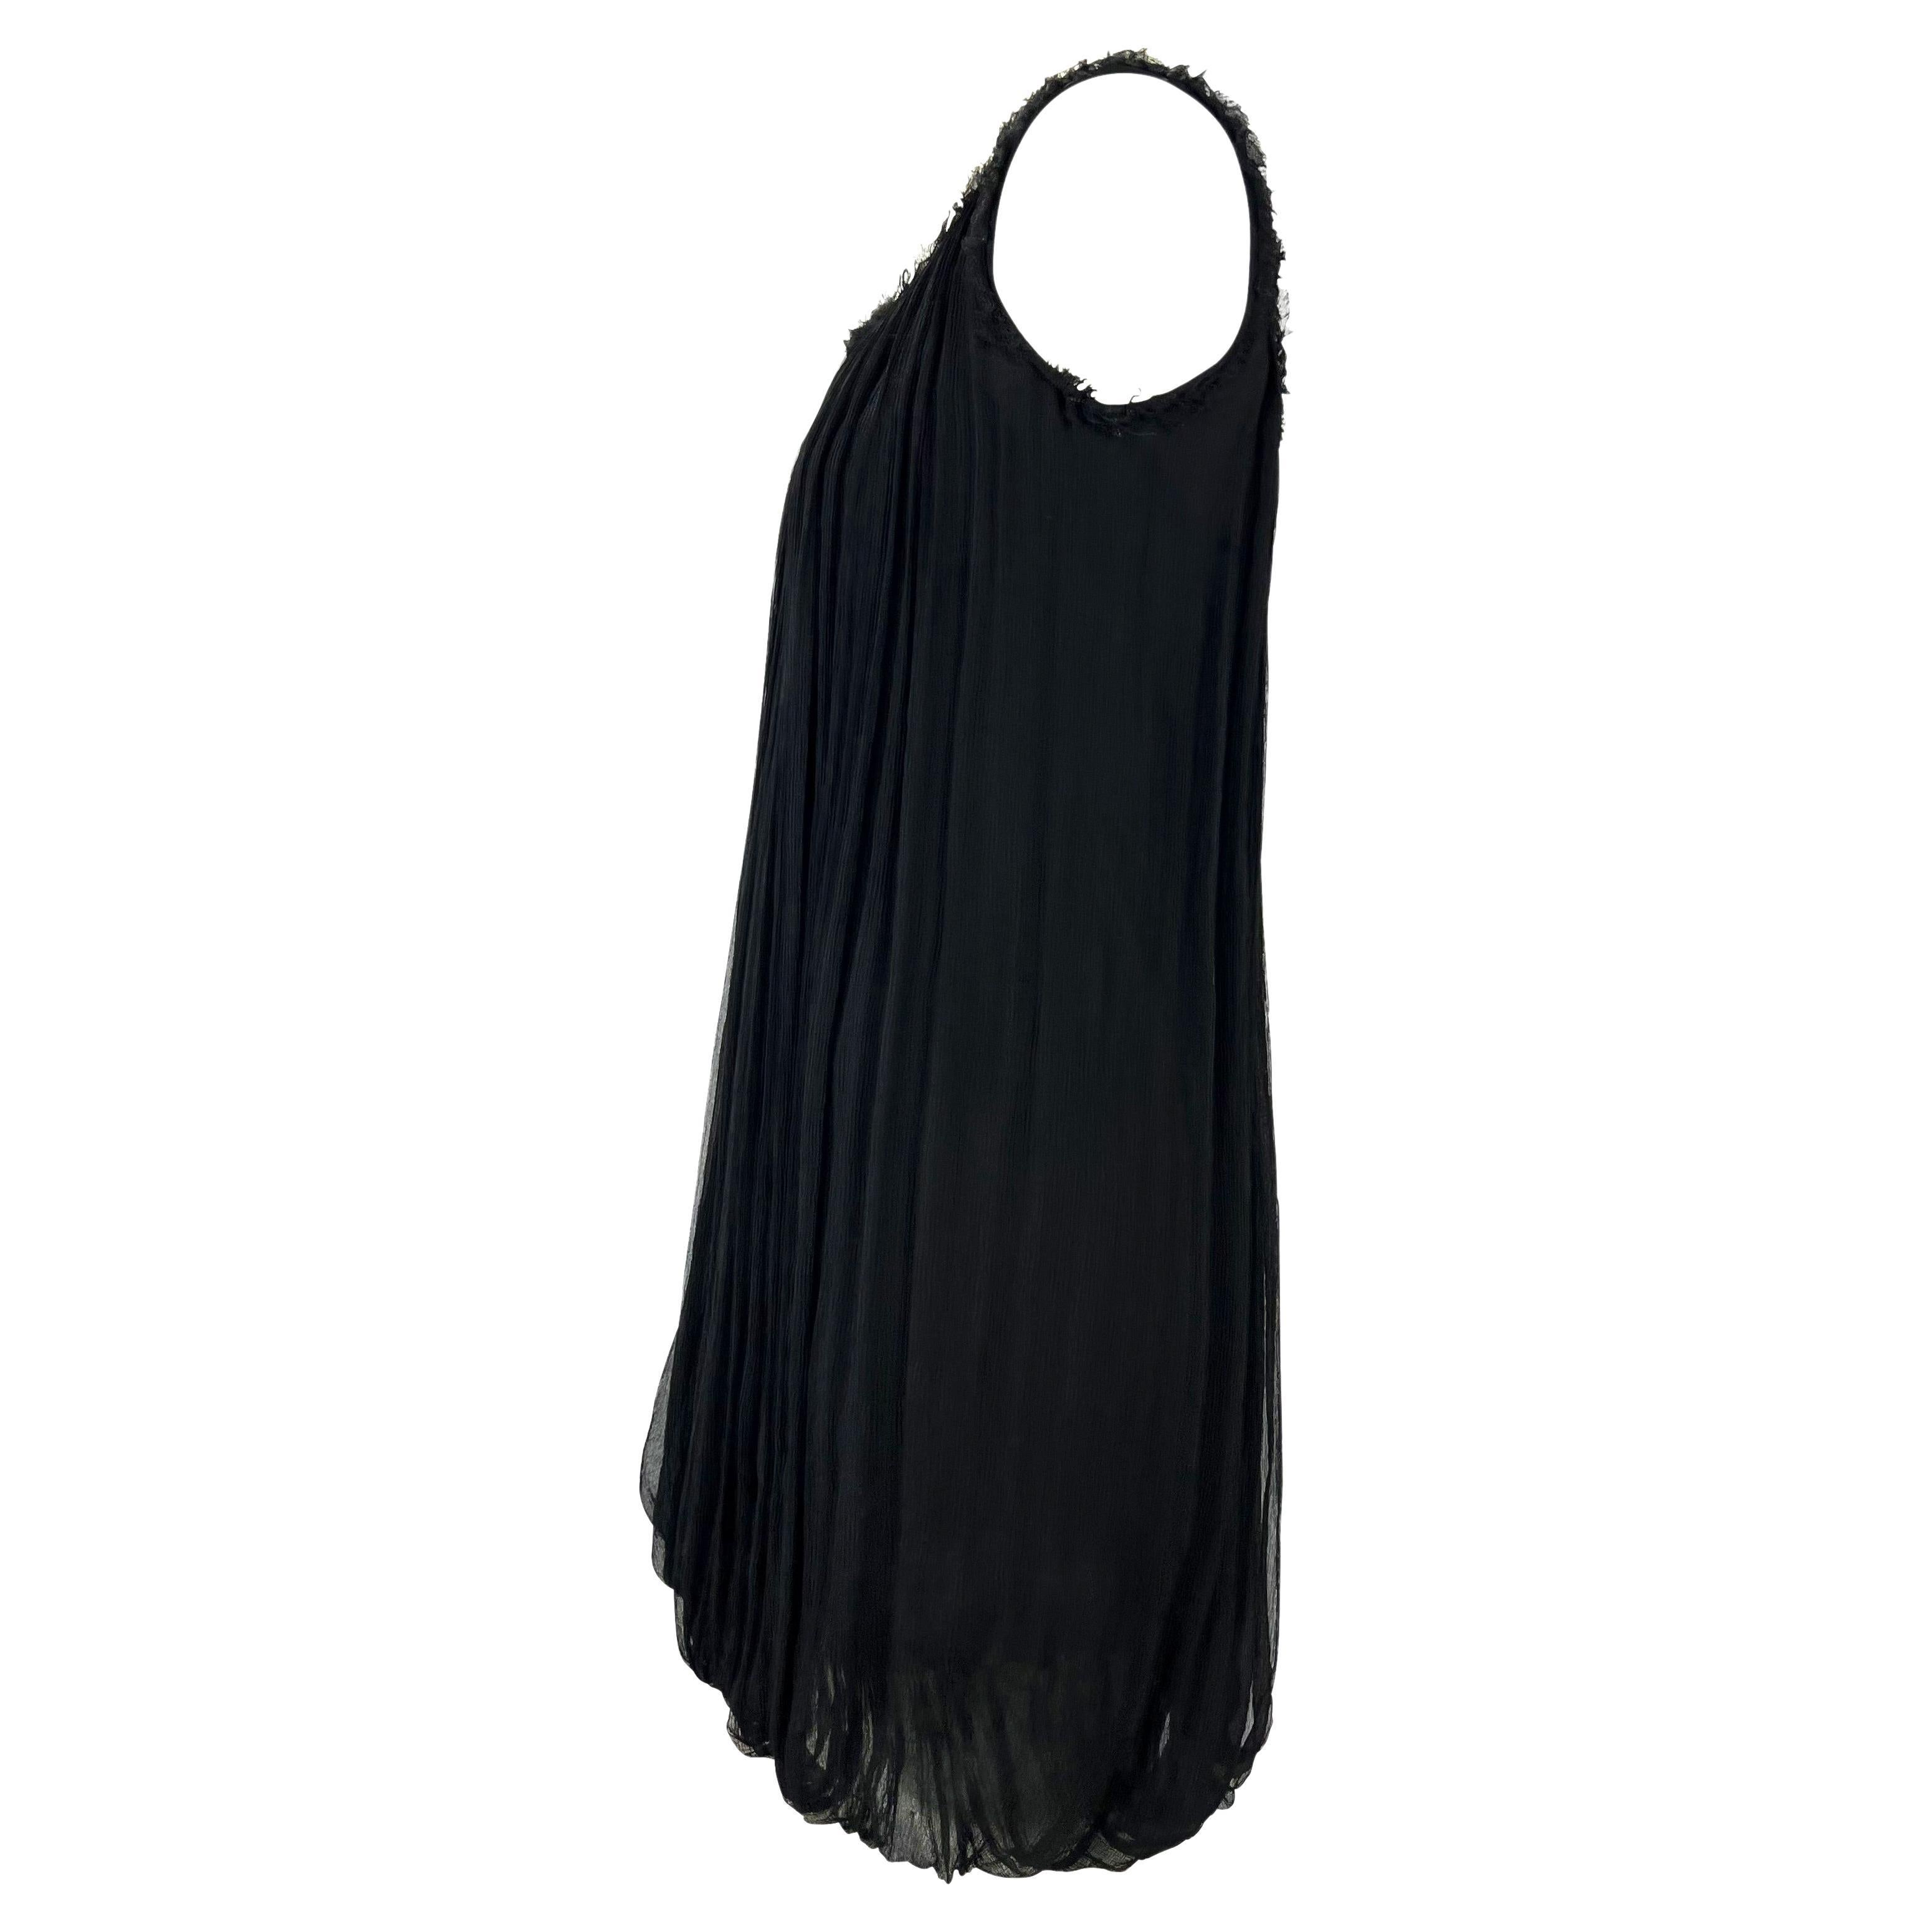 F/W 2001 Gucci by Tom Ford Black Tulle Sleeveless Shift Dress In Excellent Condition For Sale In West Hollywood, CA